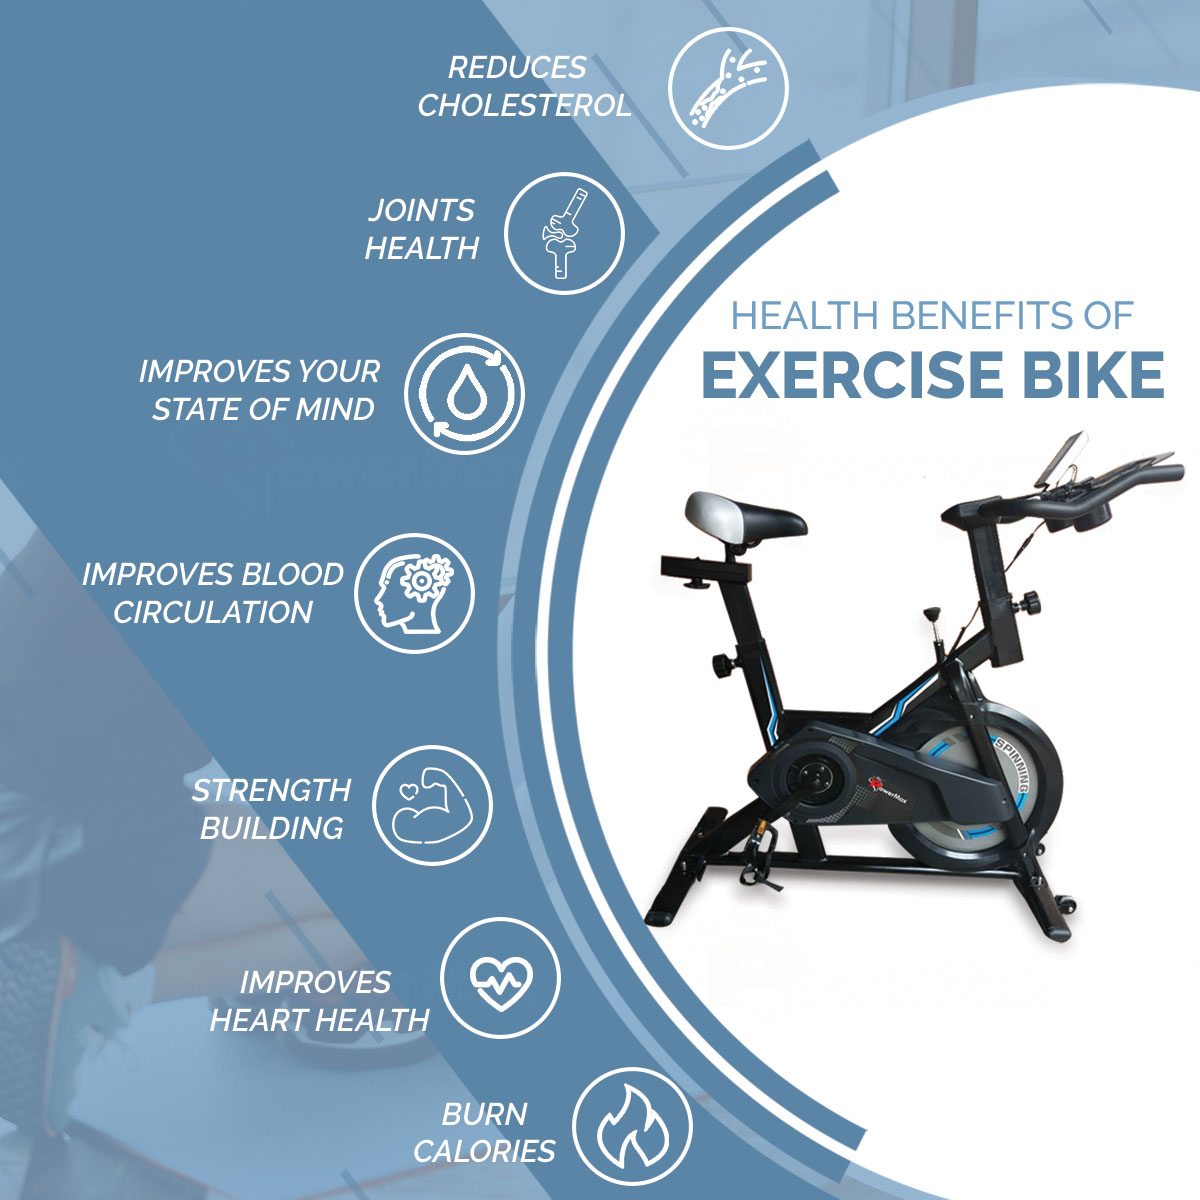 Home Use Spin Bike /Group Bike with iPad & Bottle holder